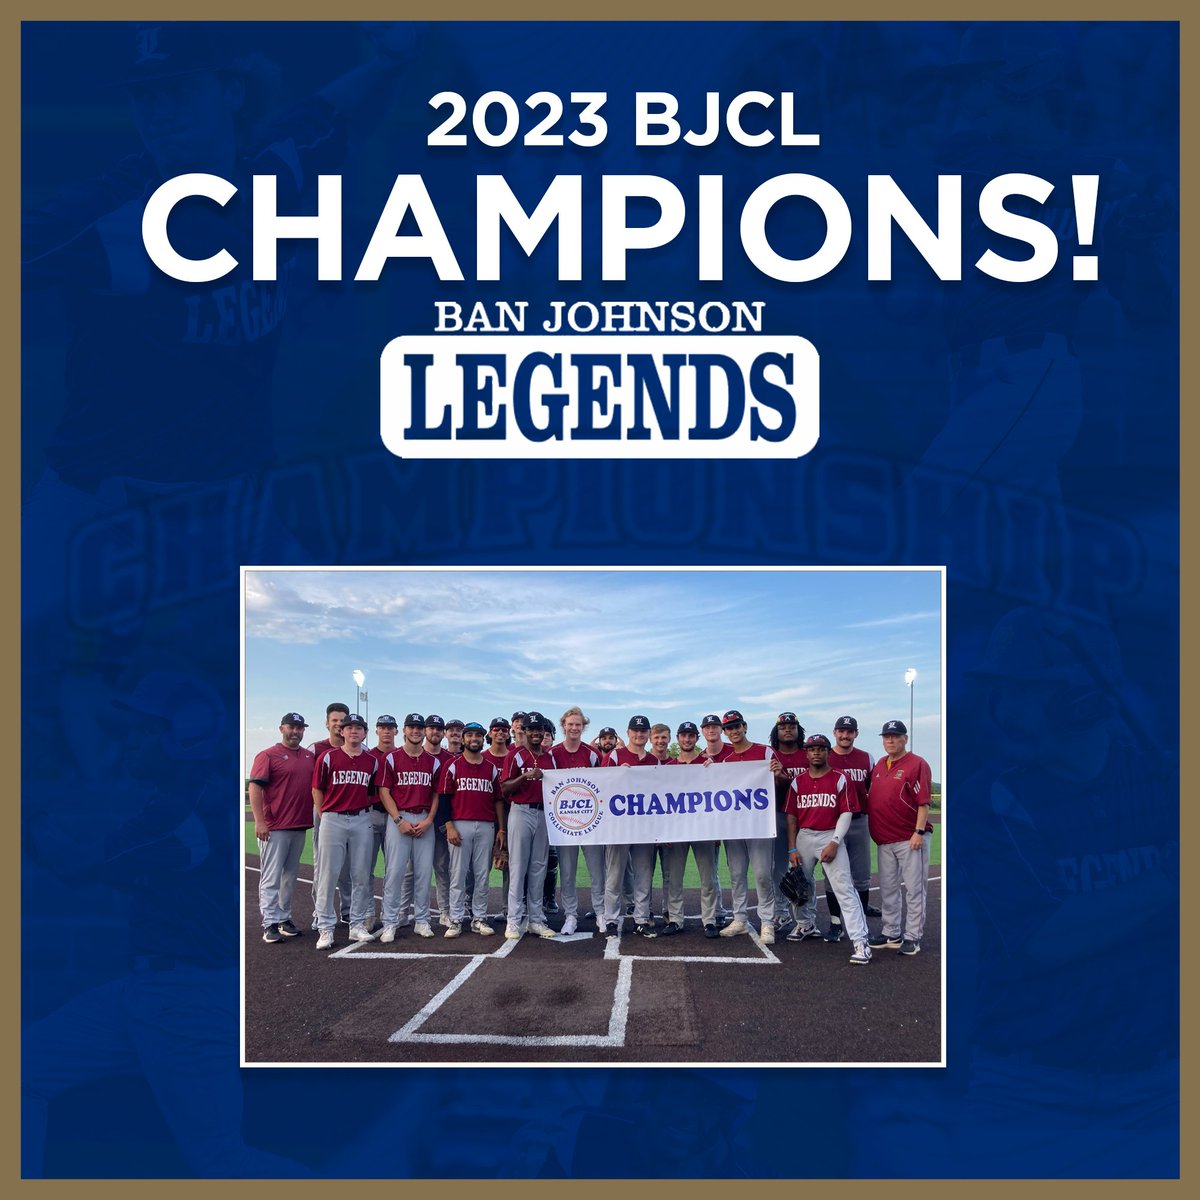 Congratulations to the 2023 BJCL Champions, the 𝗕𝗮𝗻 𝗝𝗼𝗵𝗻𝘀𝗼𝗻 𝗟𝗲𝗴𝗲𝗻𝗱𝘀!